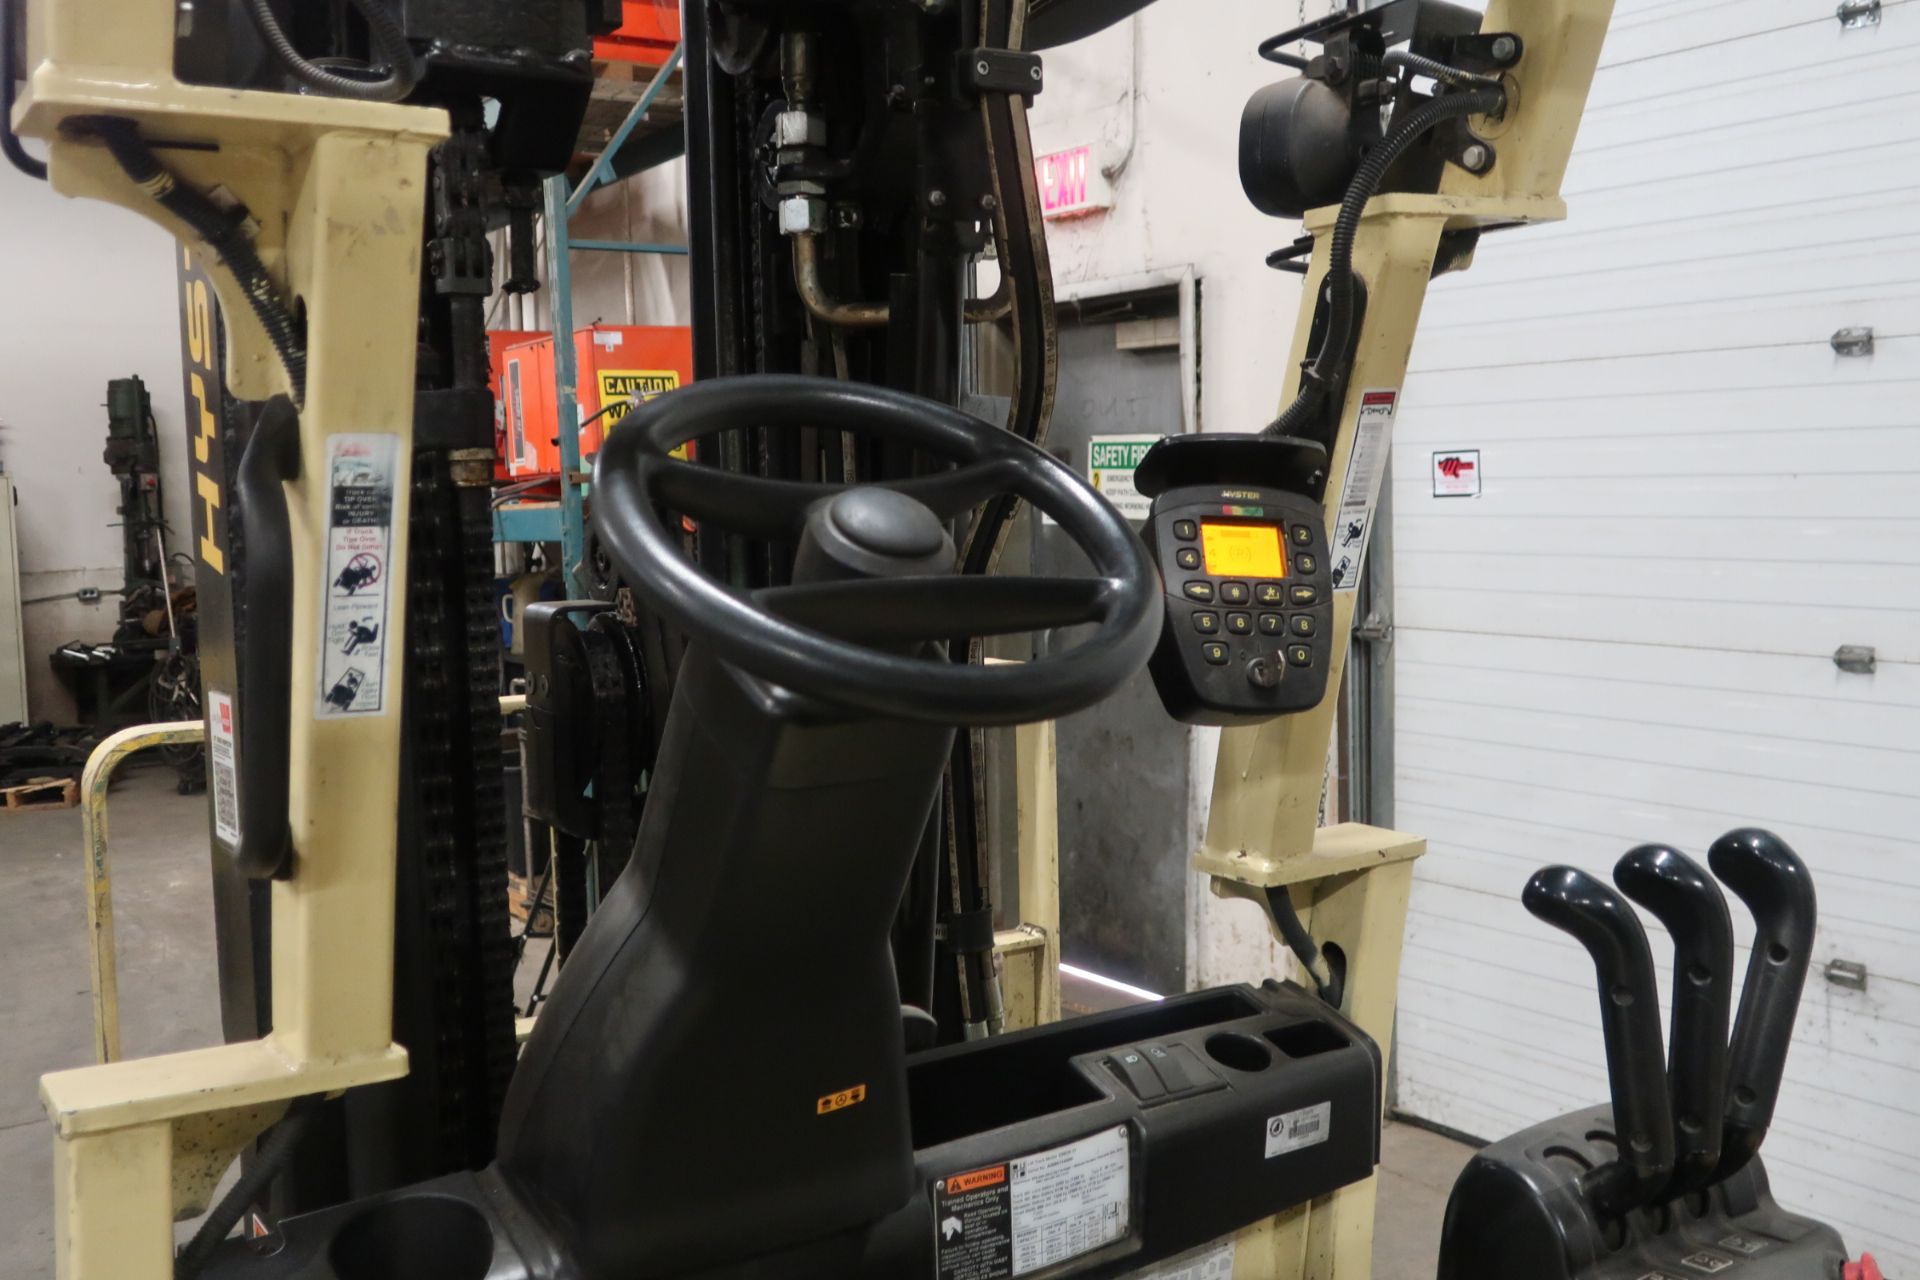 FREE CUSTOMS - 2014 Hyster 5000lbs Capacity Forklift with 4-stage mast - electric with sideshift - Image 2 of 3